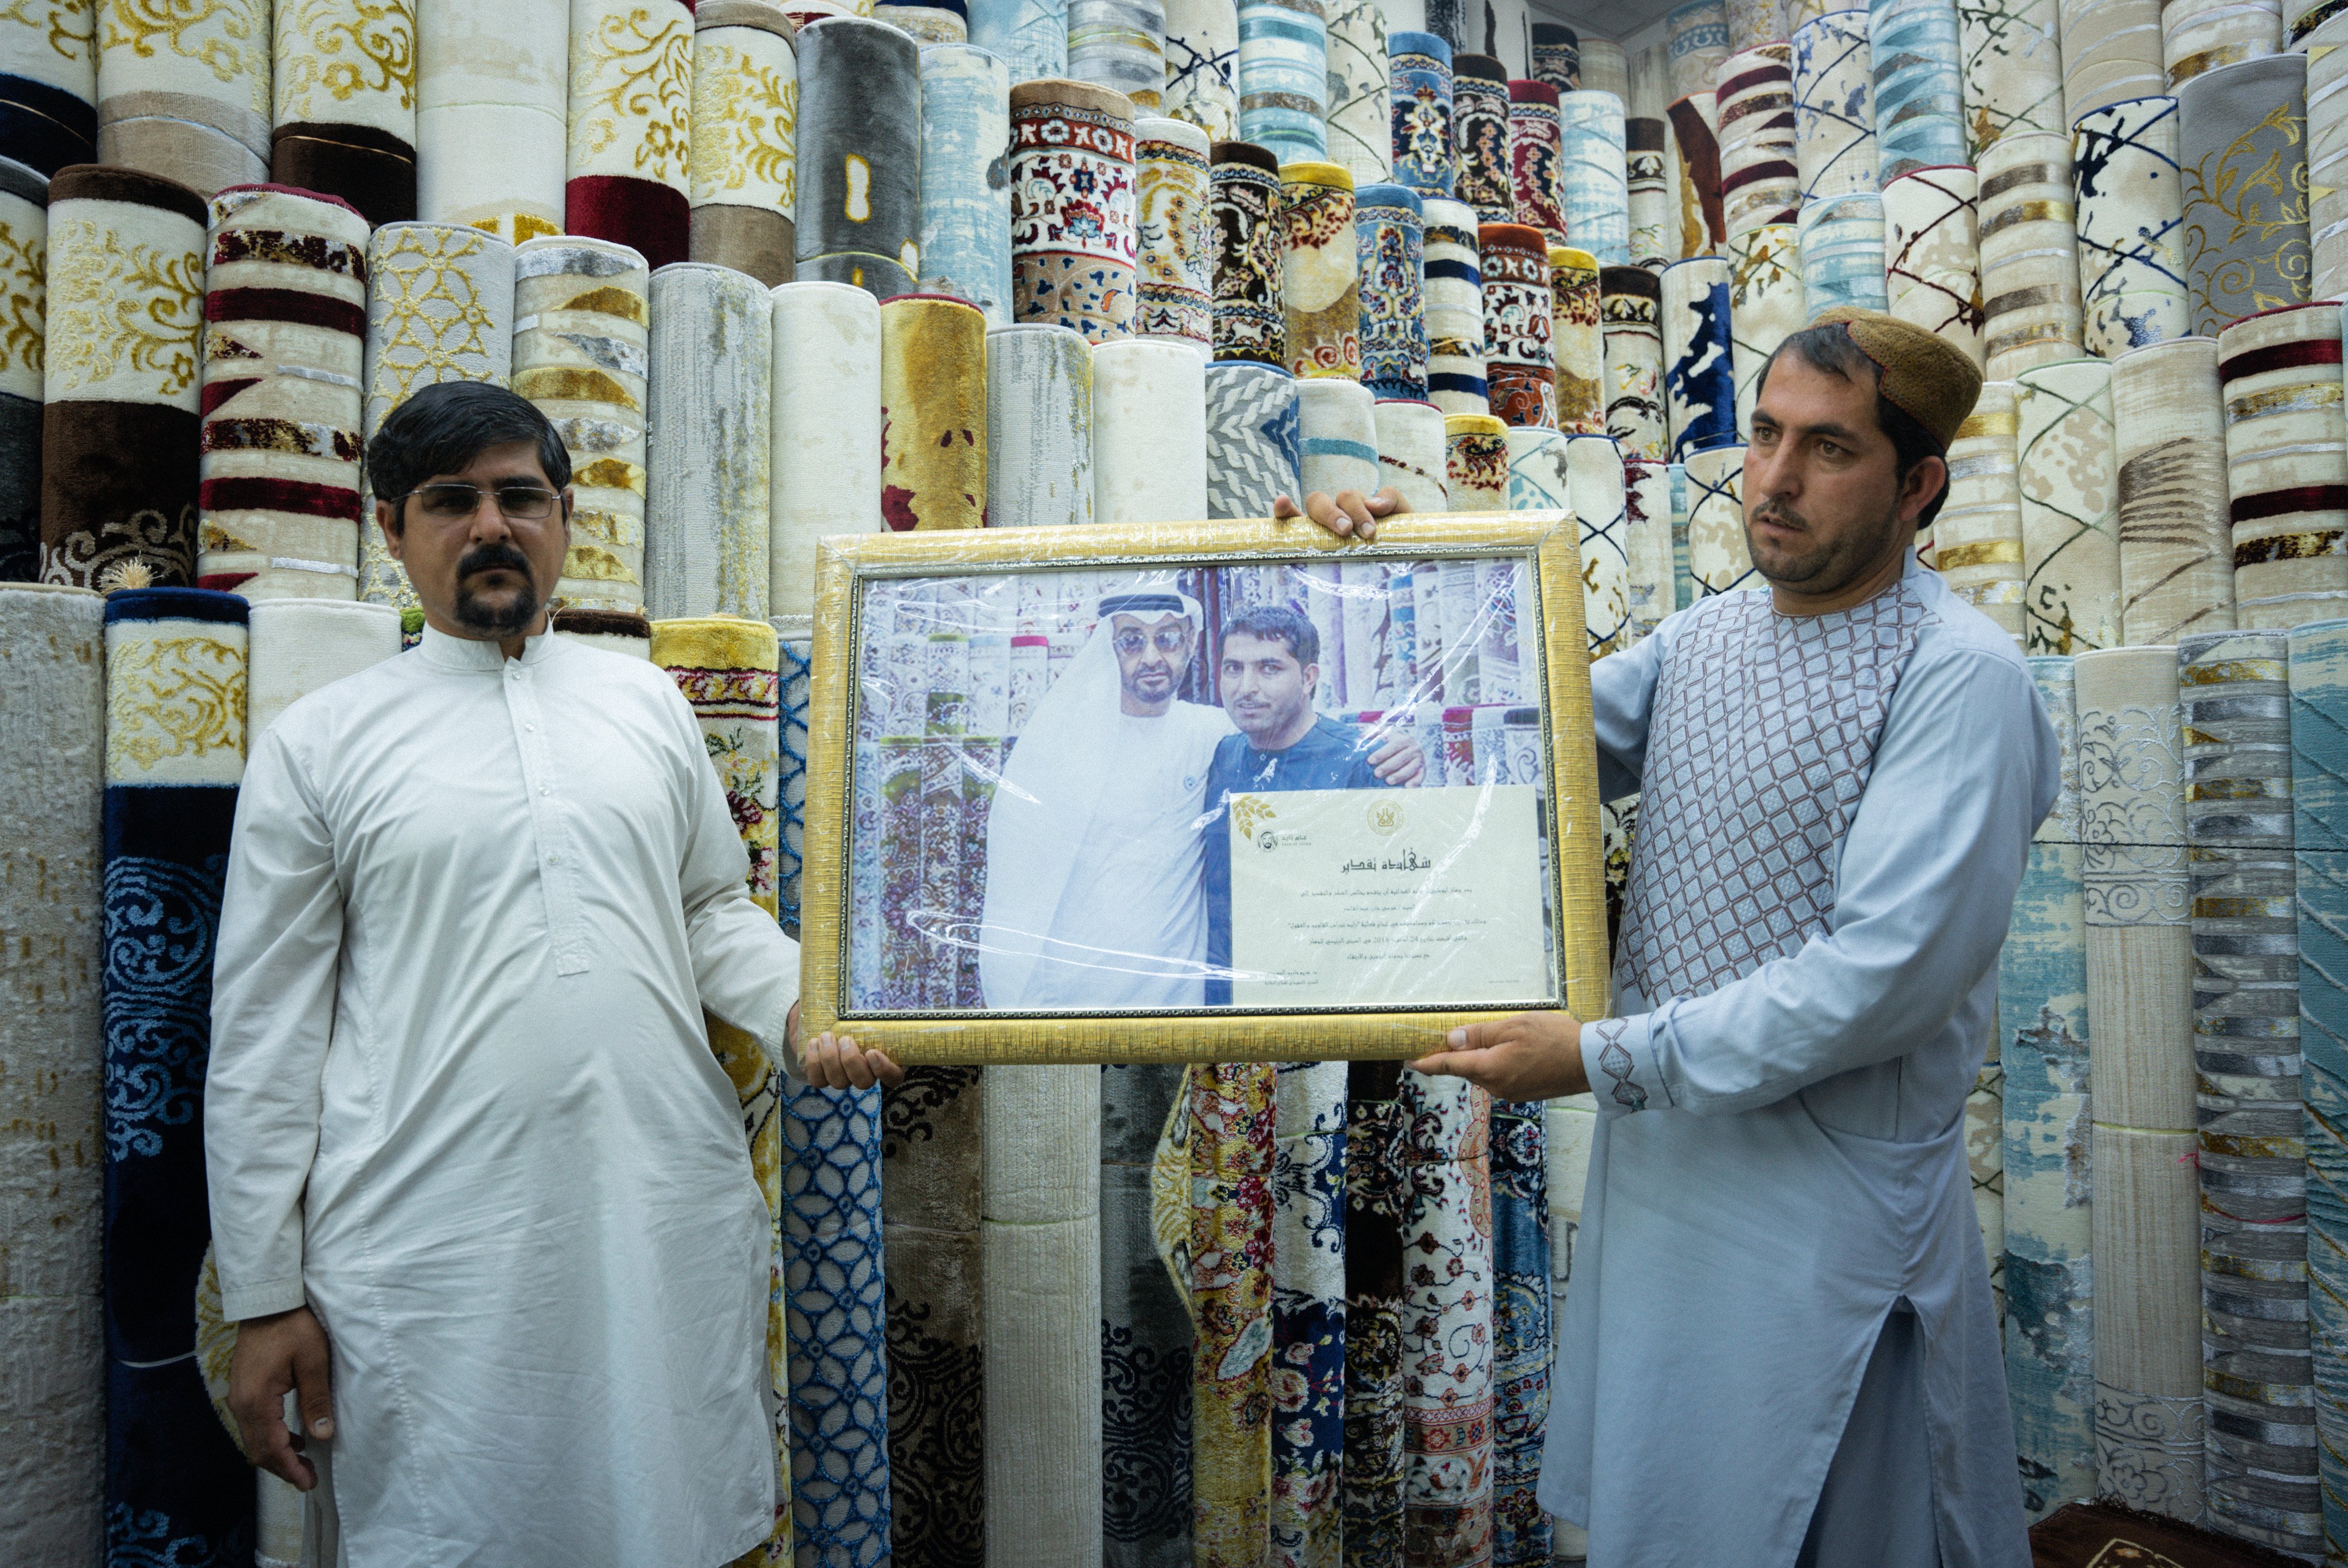 The owner and shopkeeper of Al Safa Carpet shop standing and holding a framed certificate